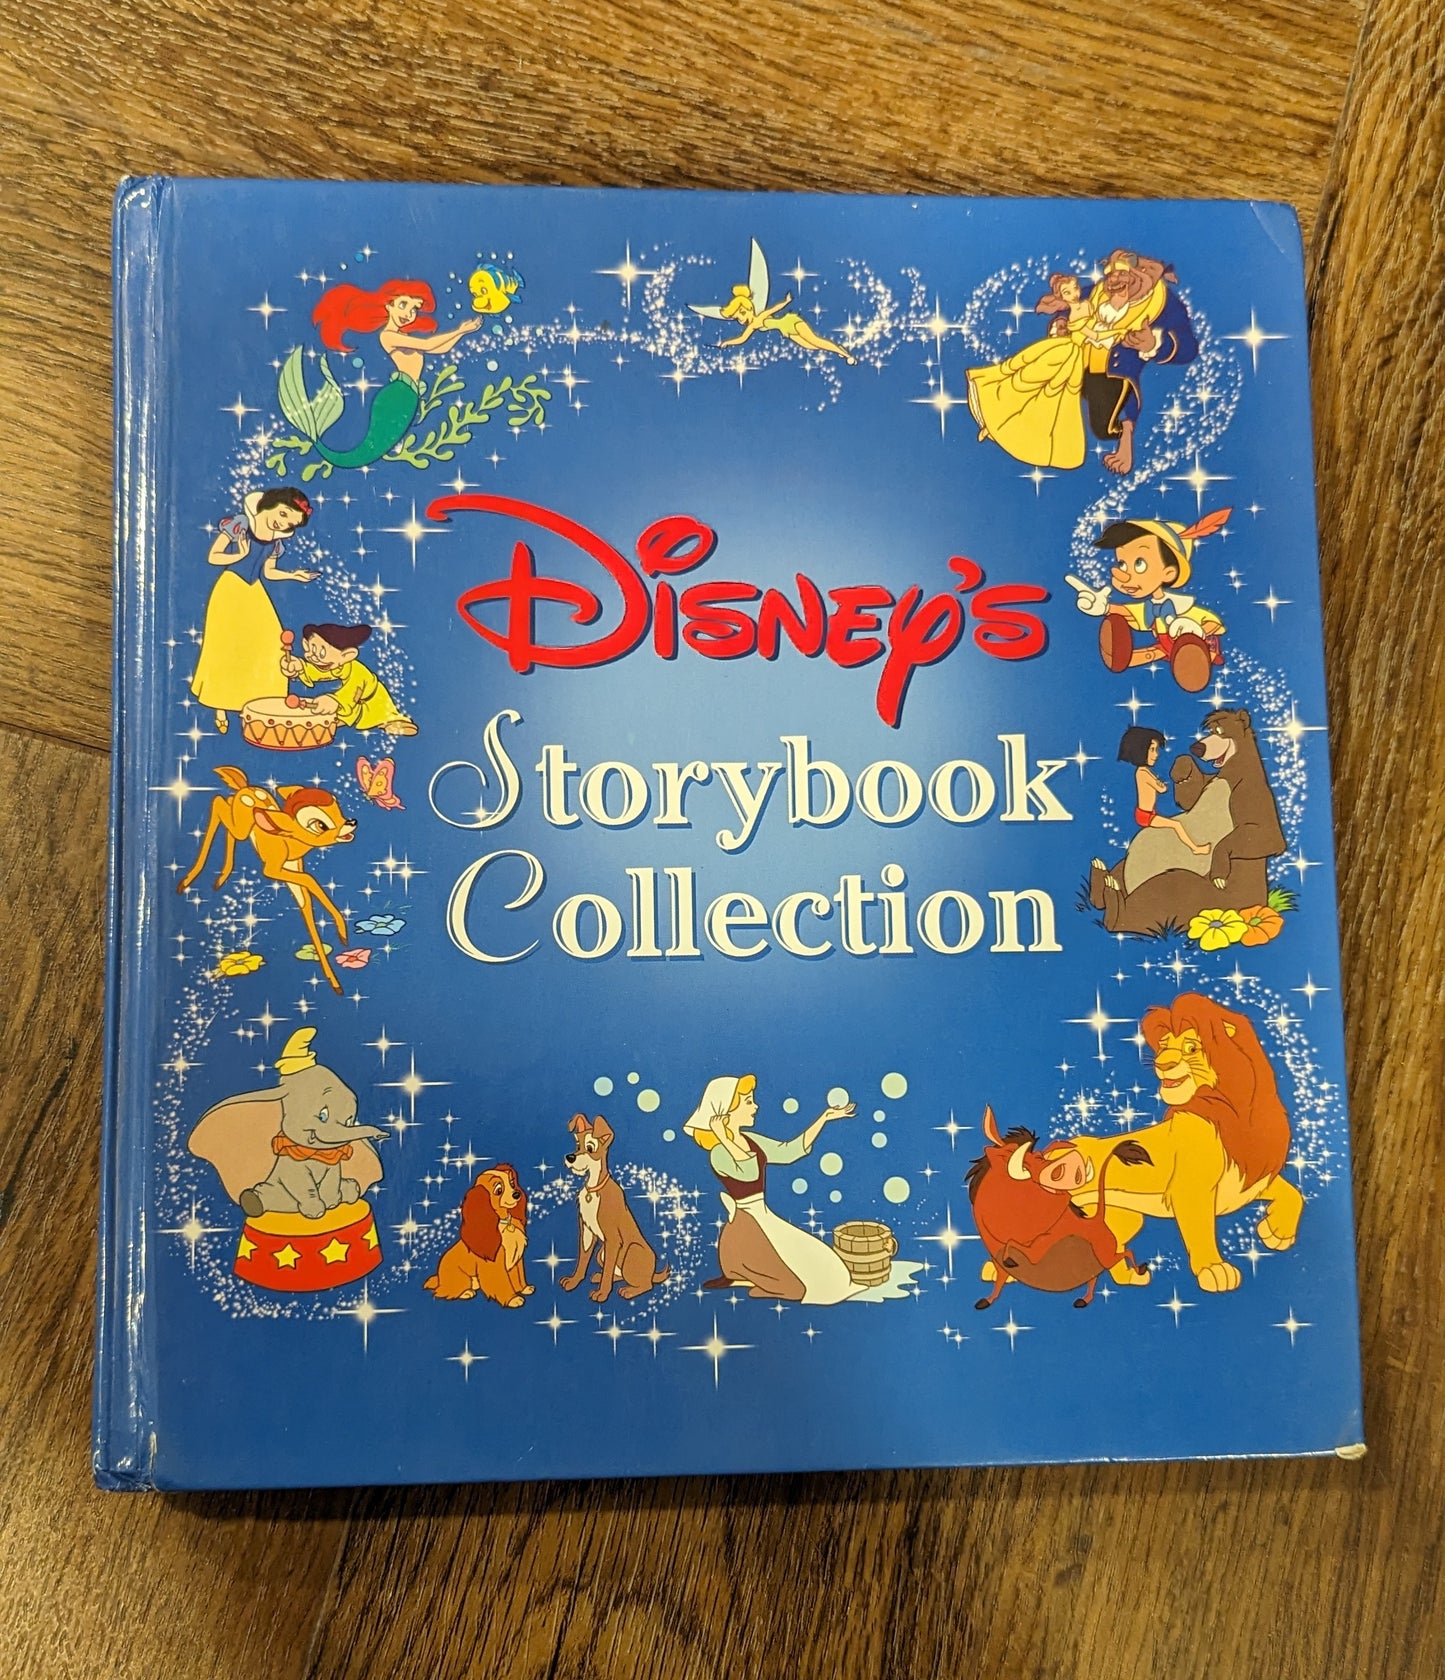 Disney storybook collection